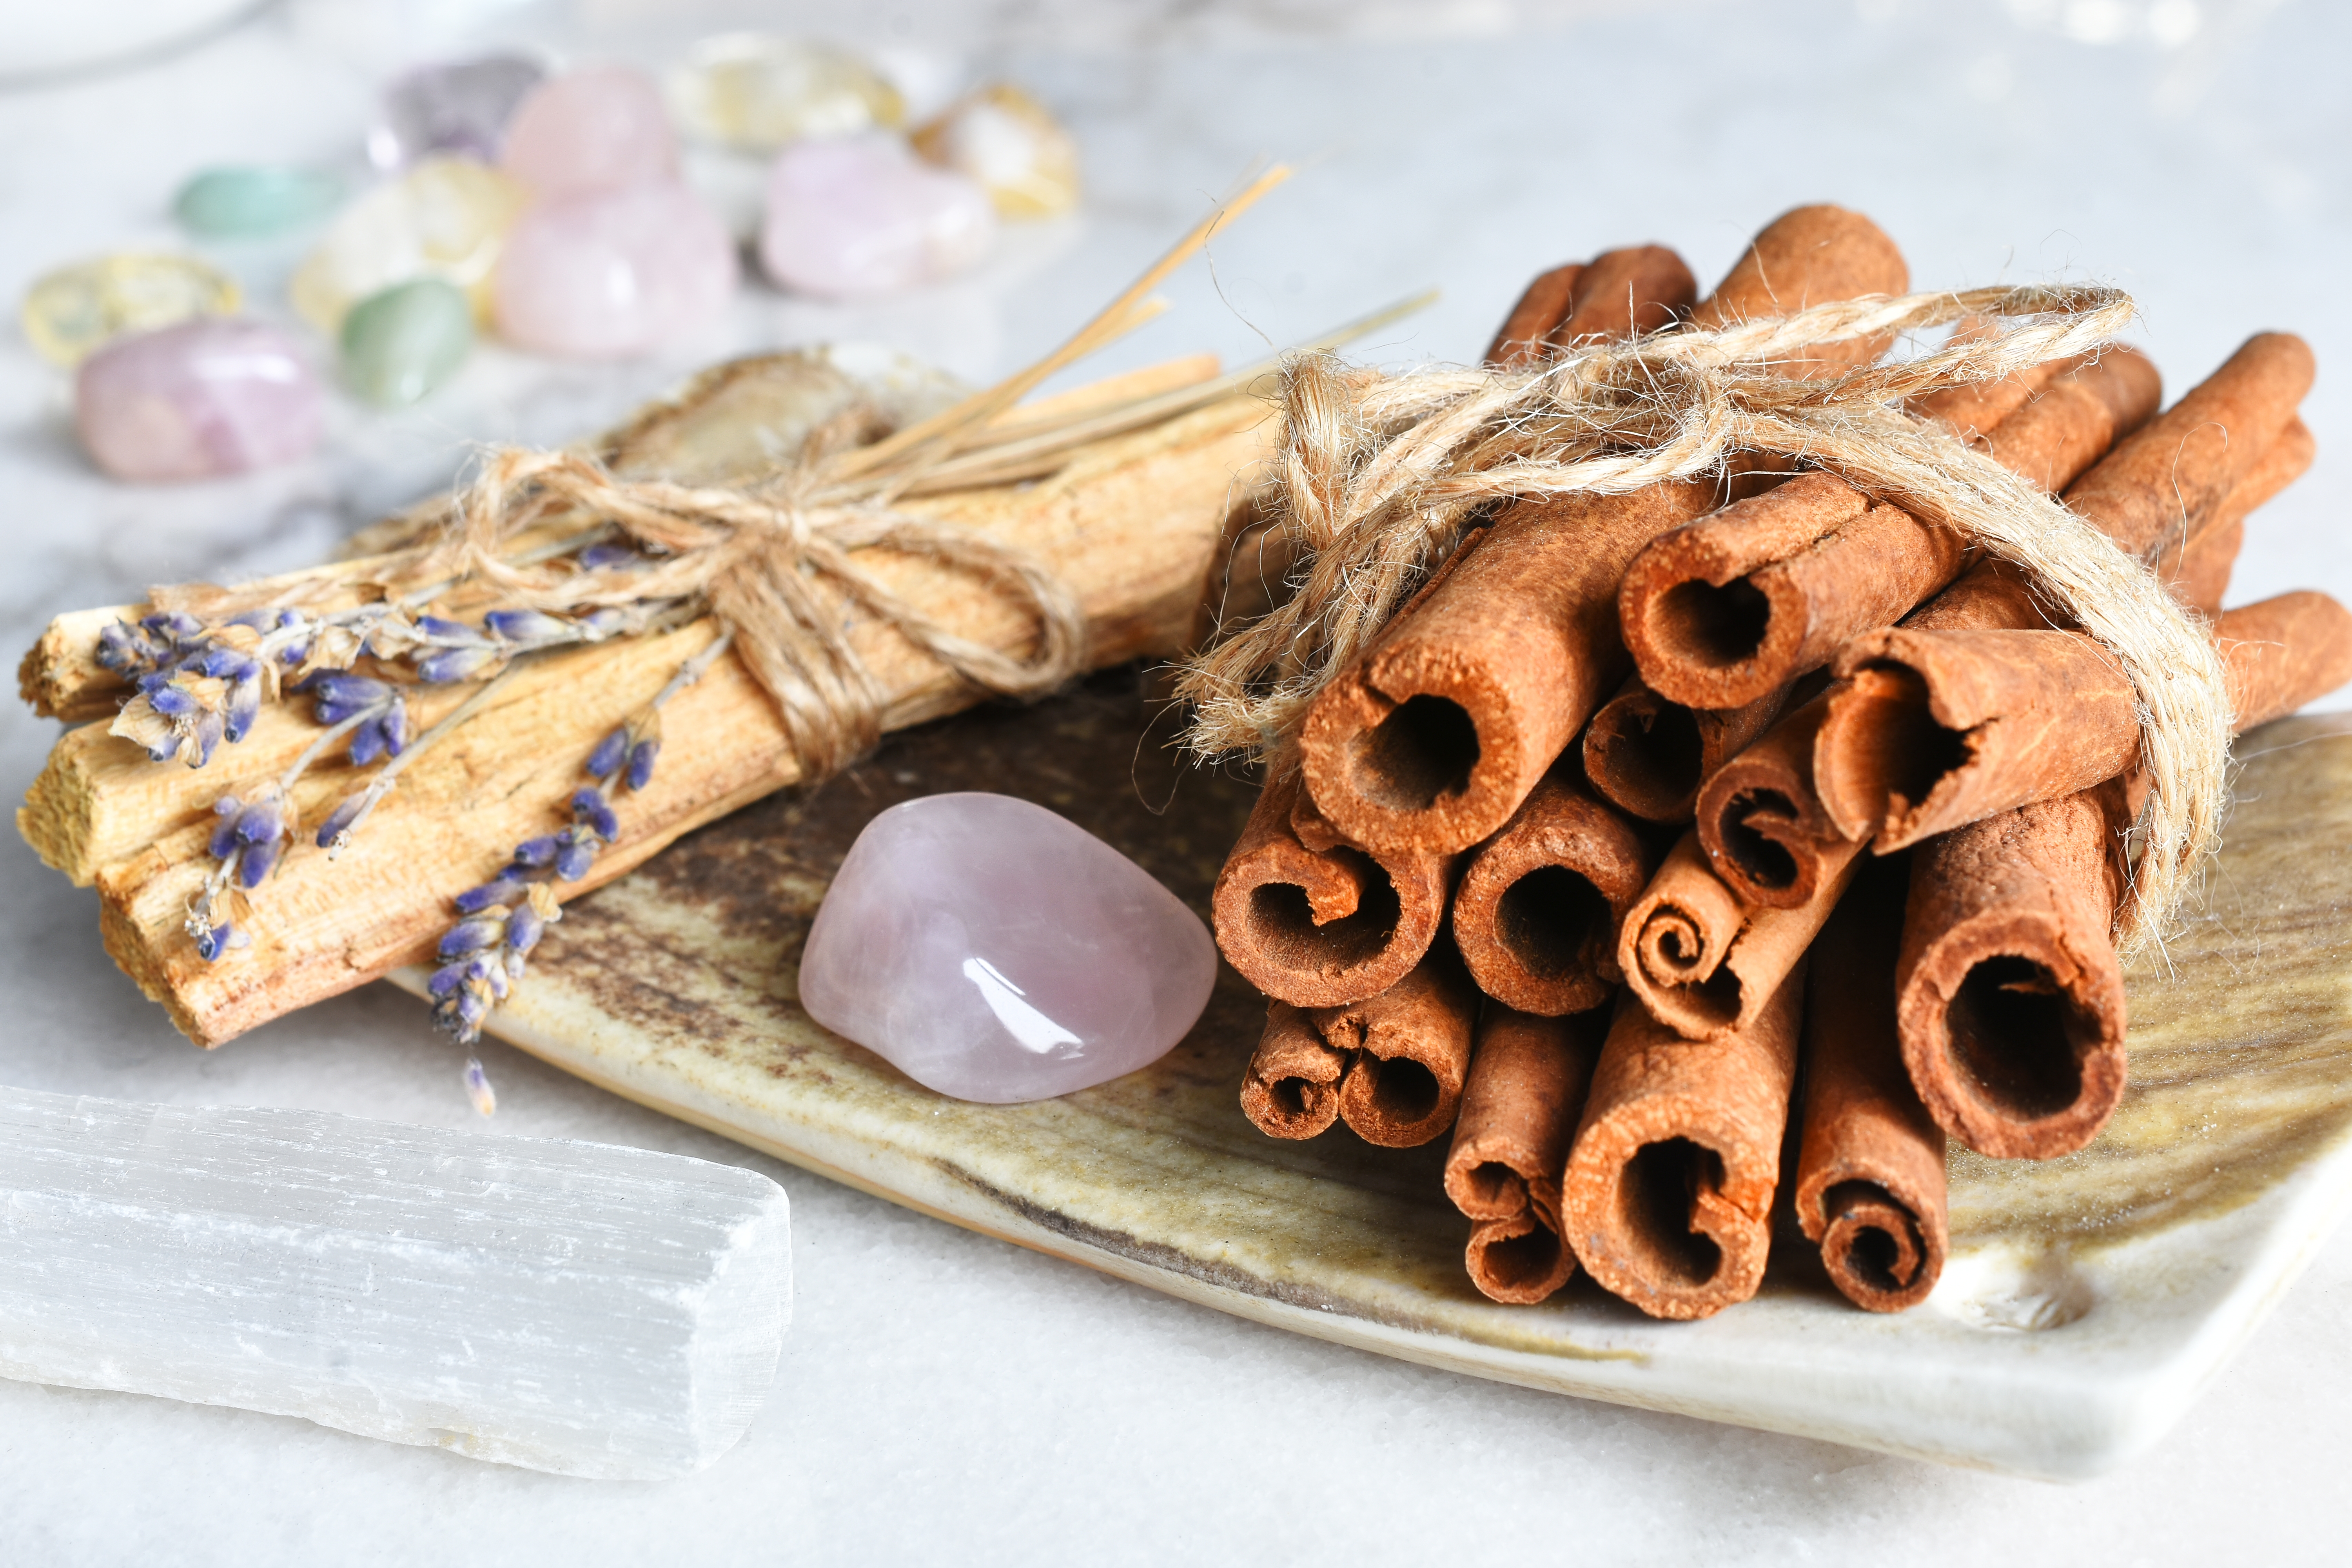 Cinnamon and quartz are the only materials you will use in this feng shui ritual.